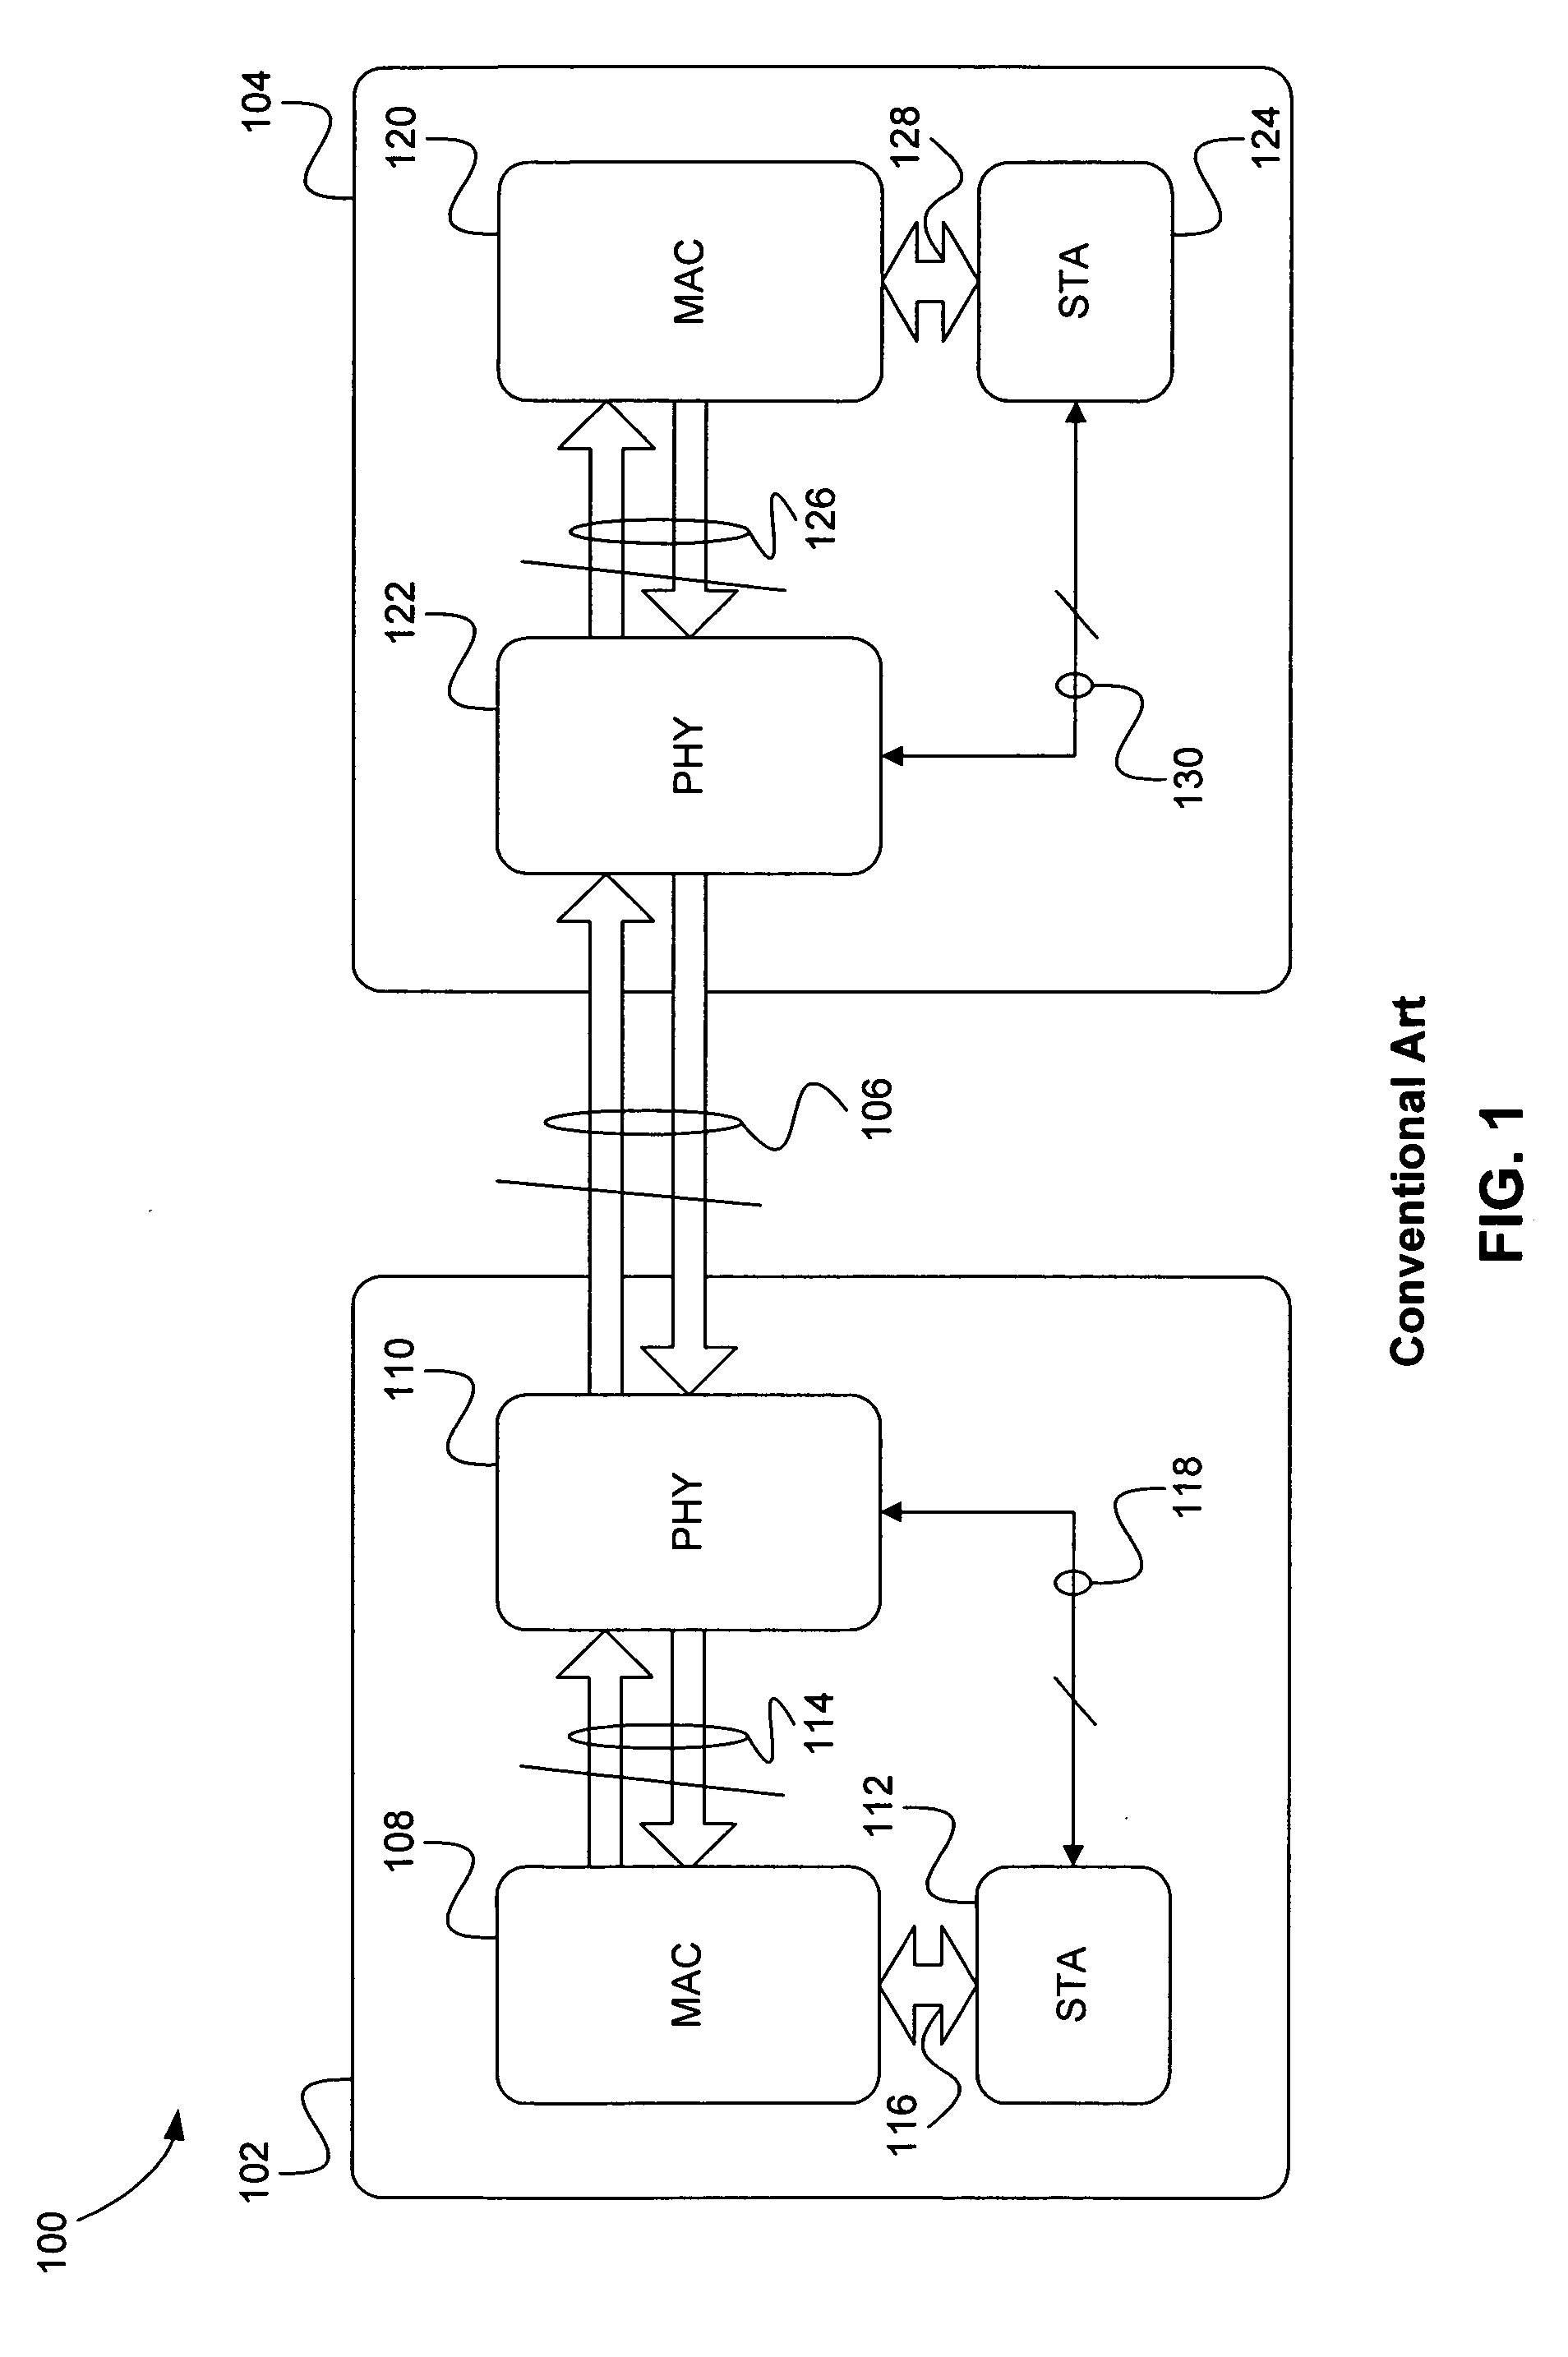 Apparatus and method of remote PHY auto-negotiation